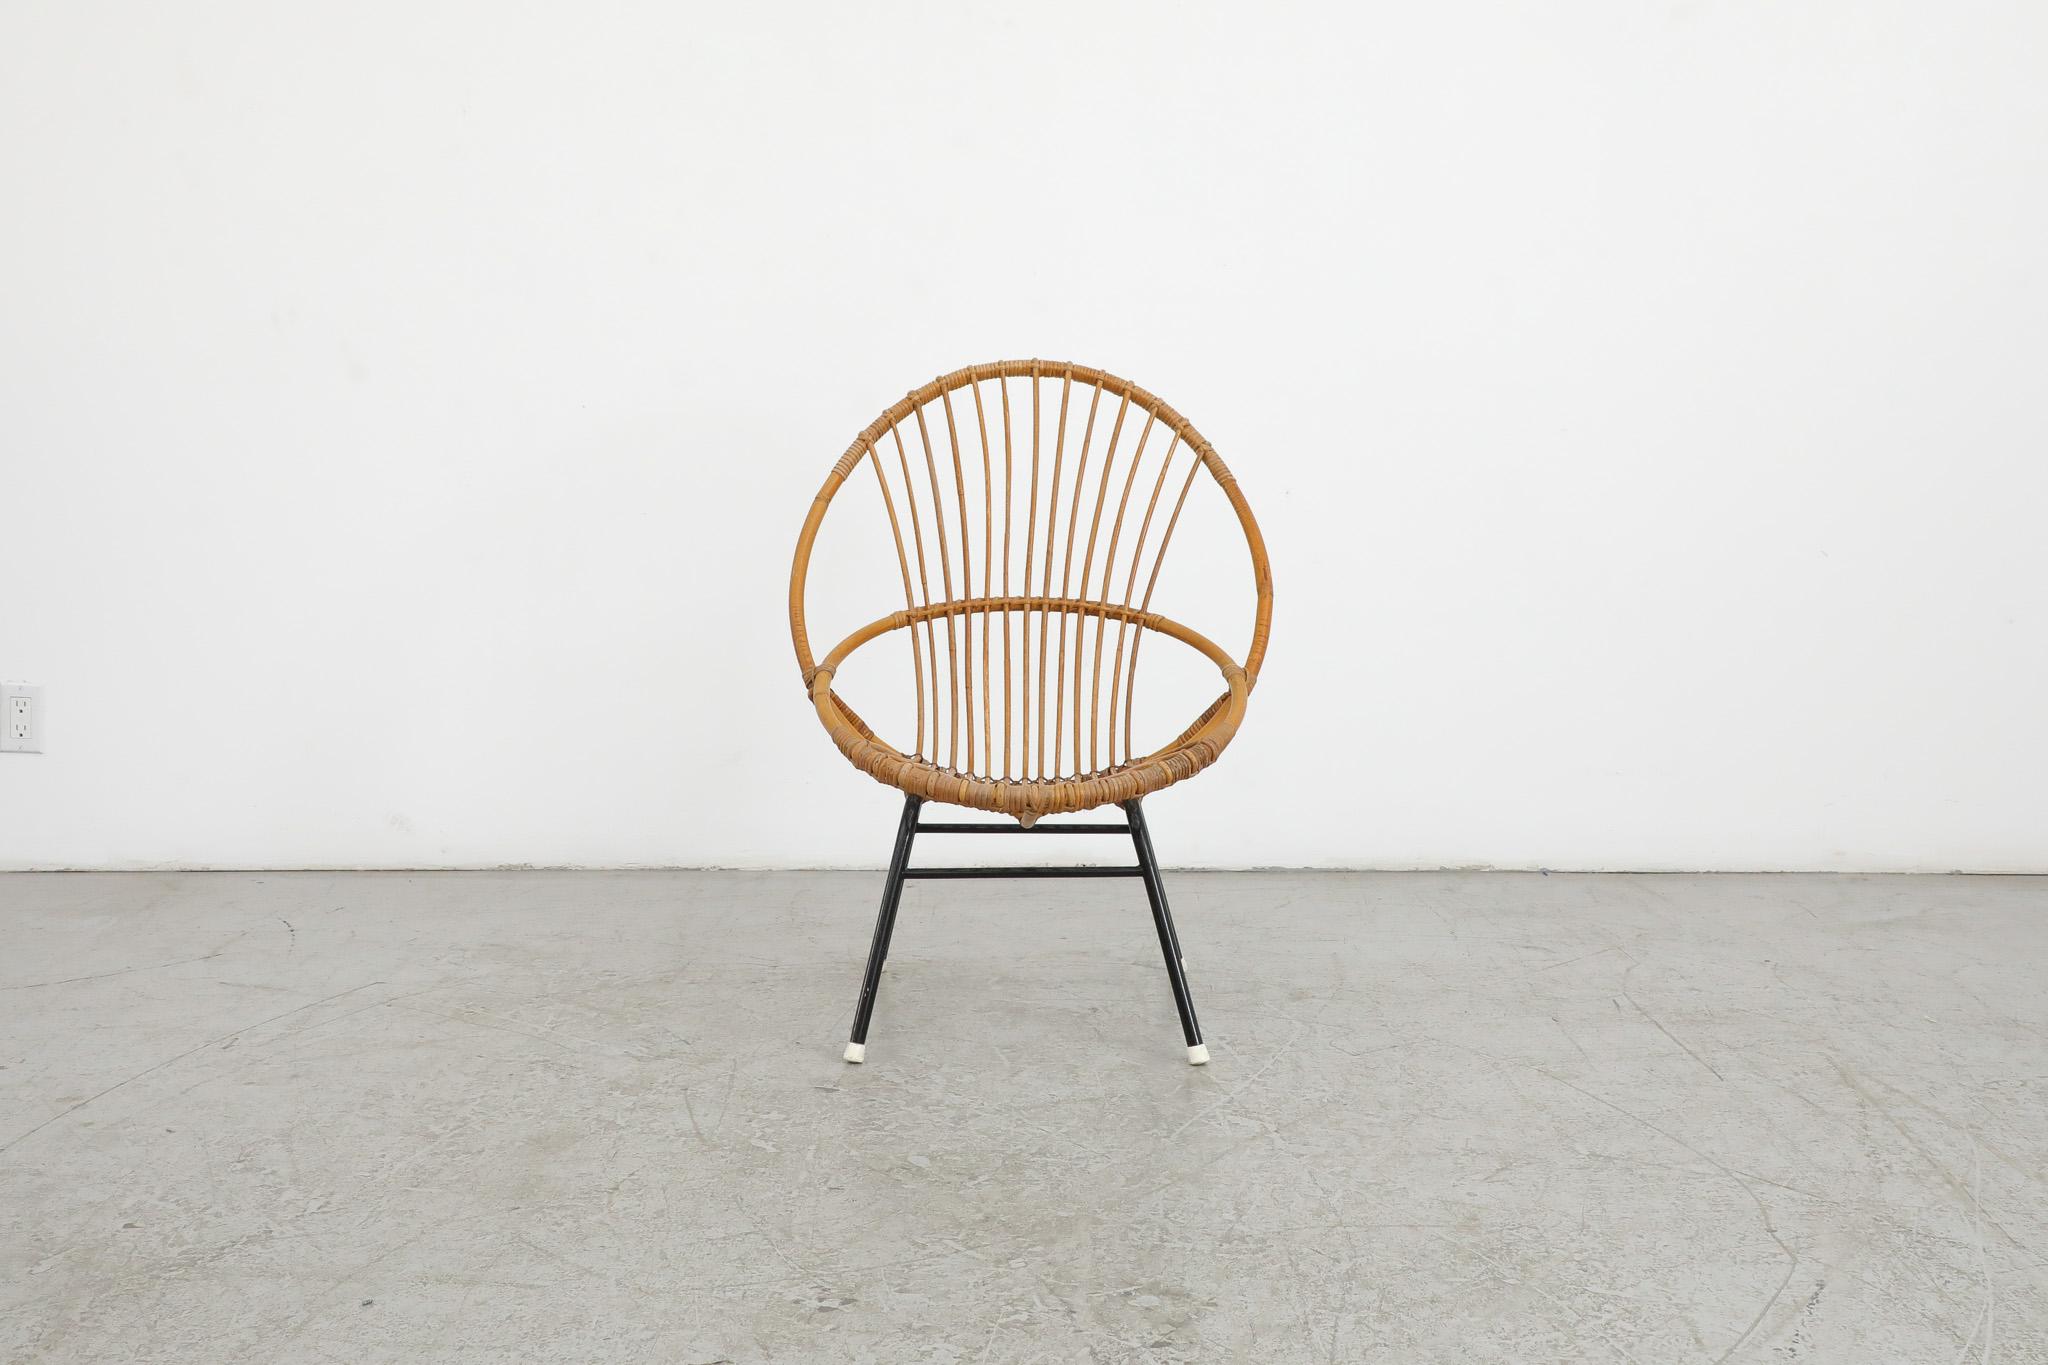 Single Mid-Century bamboo hoop chair by Rohe Noordwolde with Black enameled frame and white foot caps. In original condition with some visible wear and scratches consistent with its age and use. Perfect for outdoors under a dry protected and covered